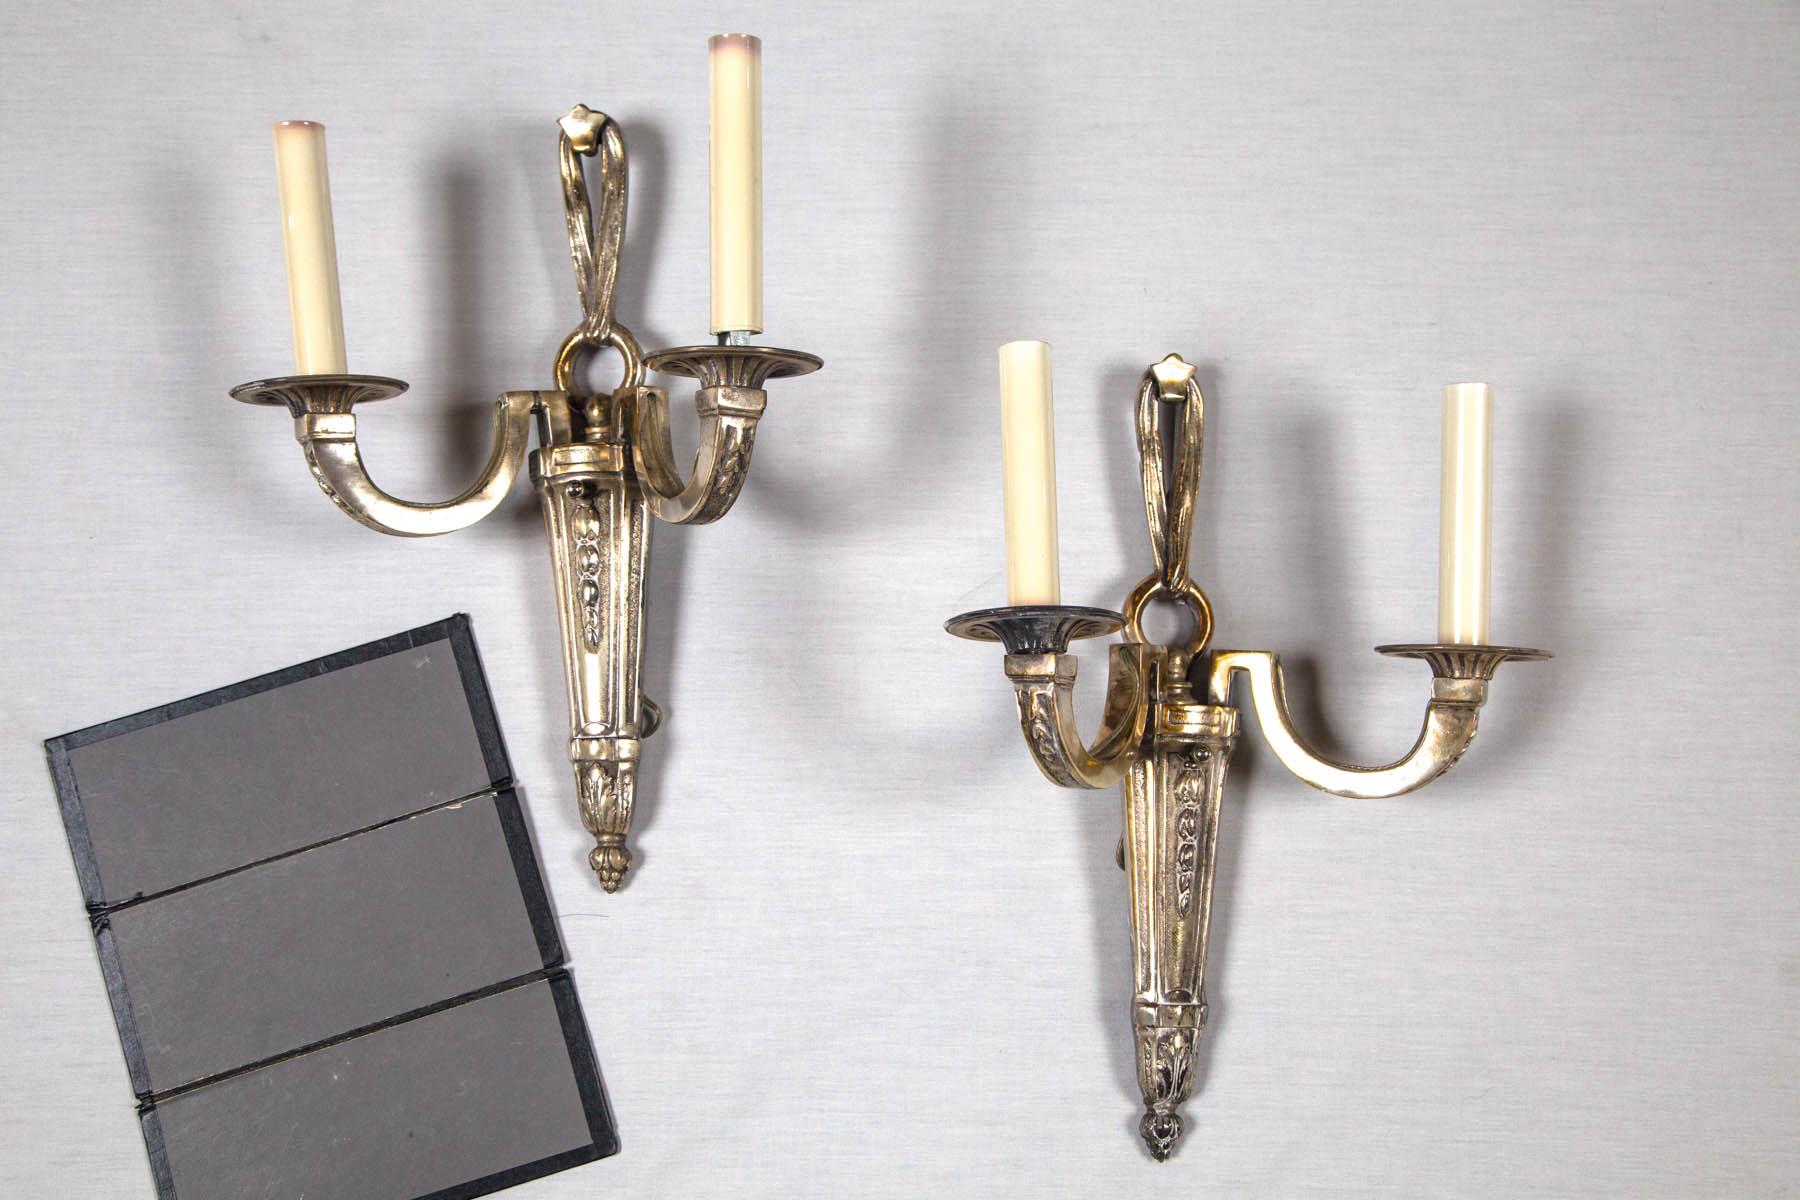 A fine original pair of E F Caldwell silvered bronze sconces dating from the year 1900. Having crisp detailed quality and original silver patina.